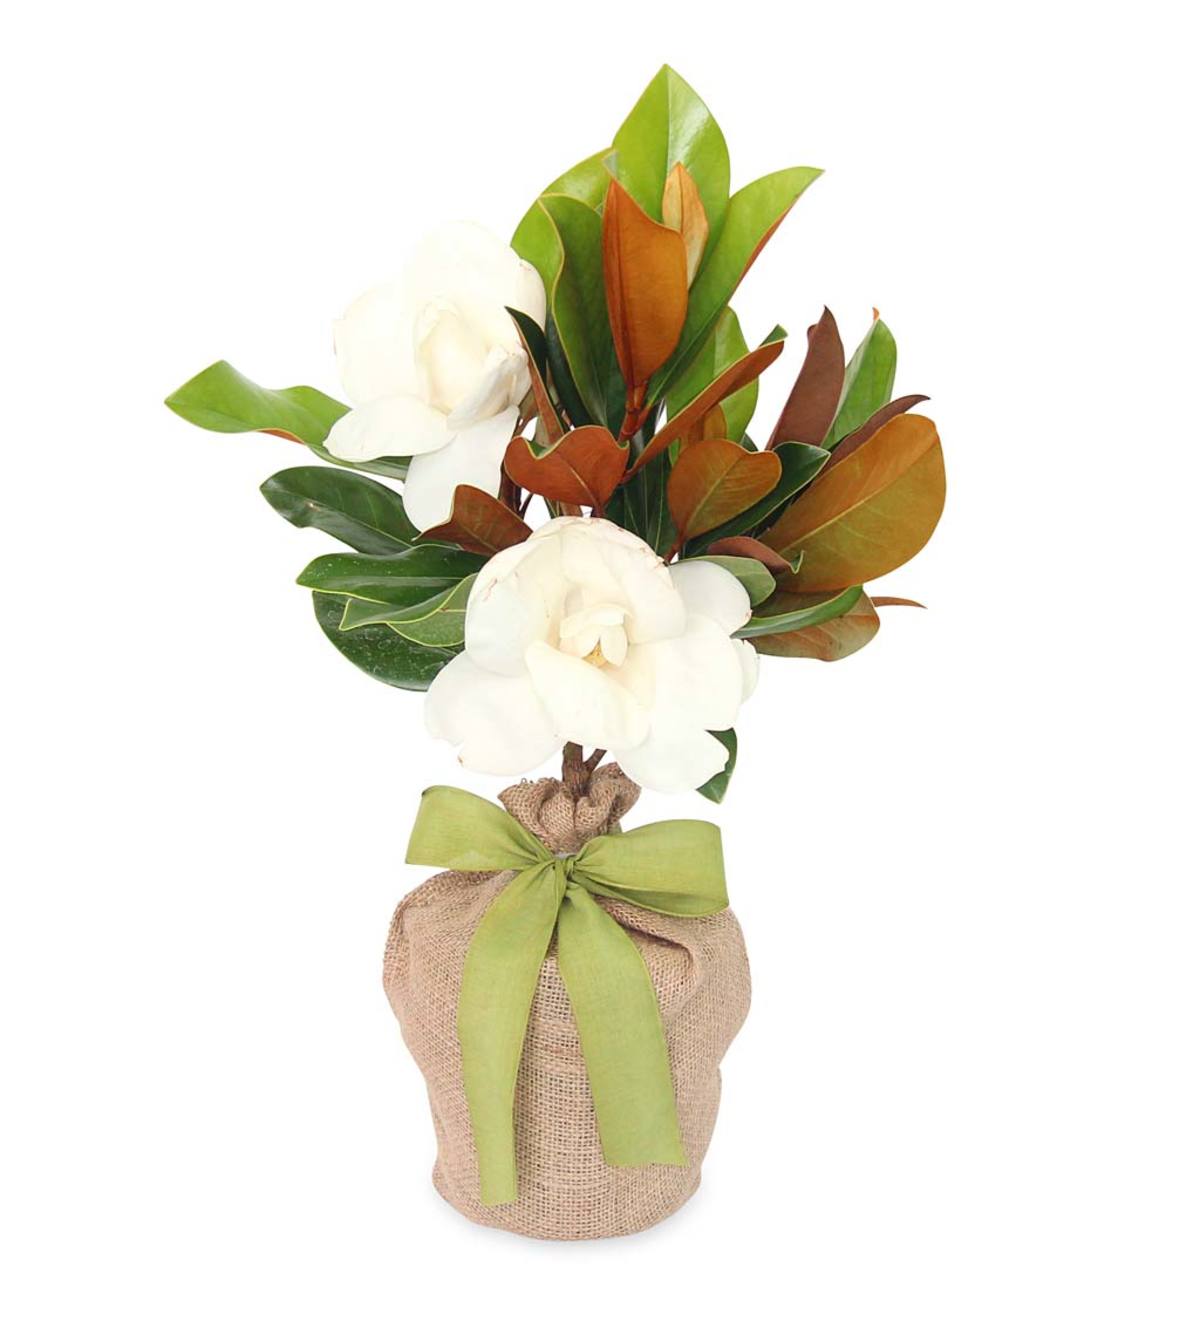 Southern Magnolia Tree in Jute Bag with Green Ribbon